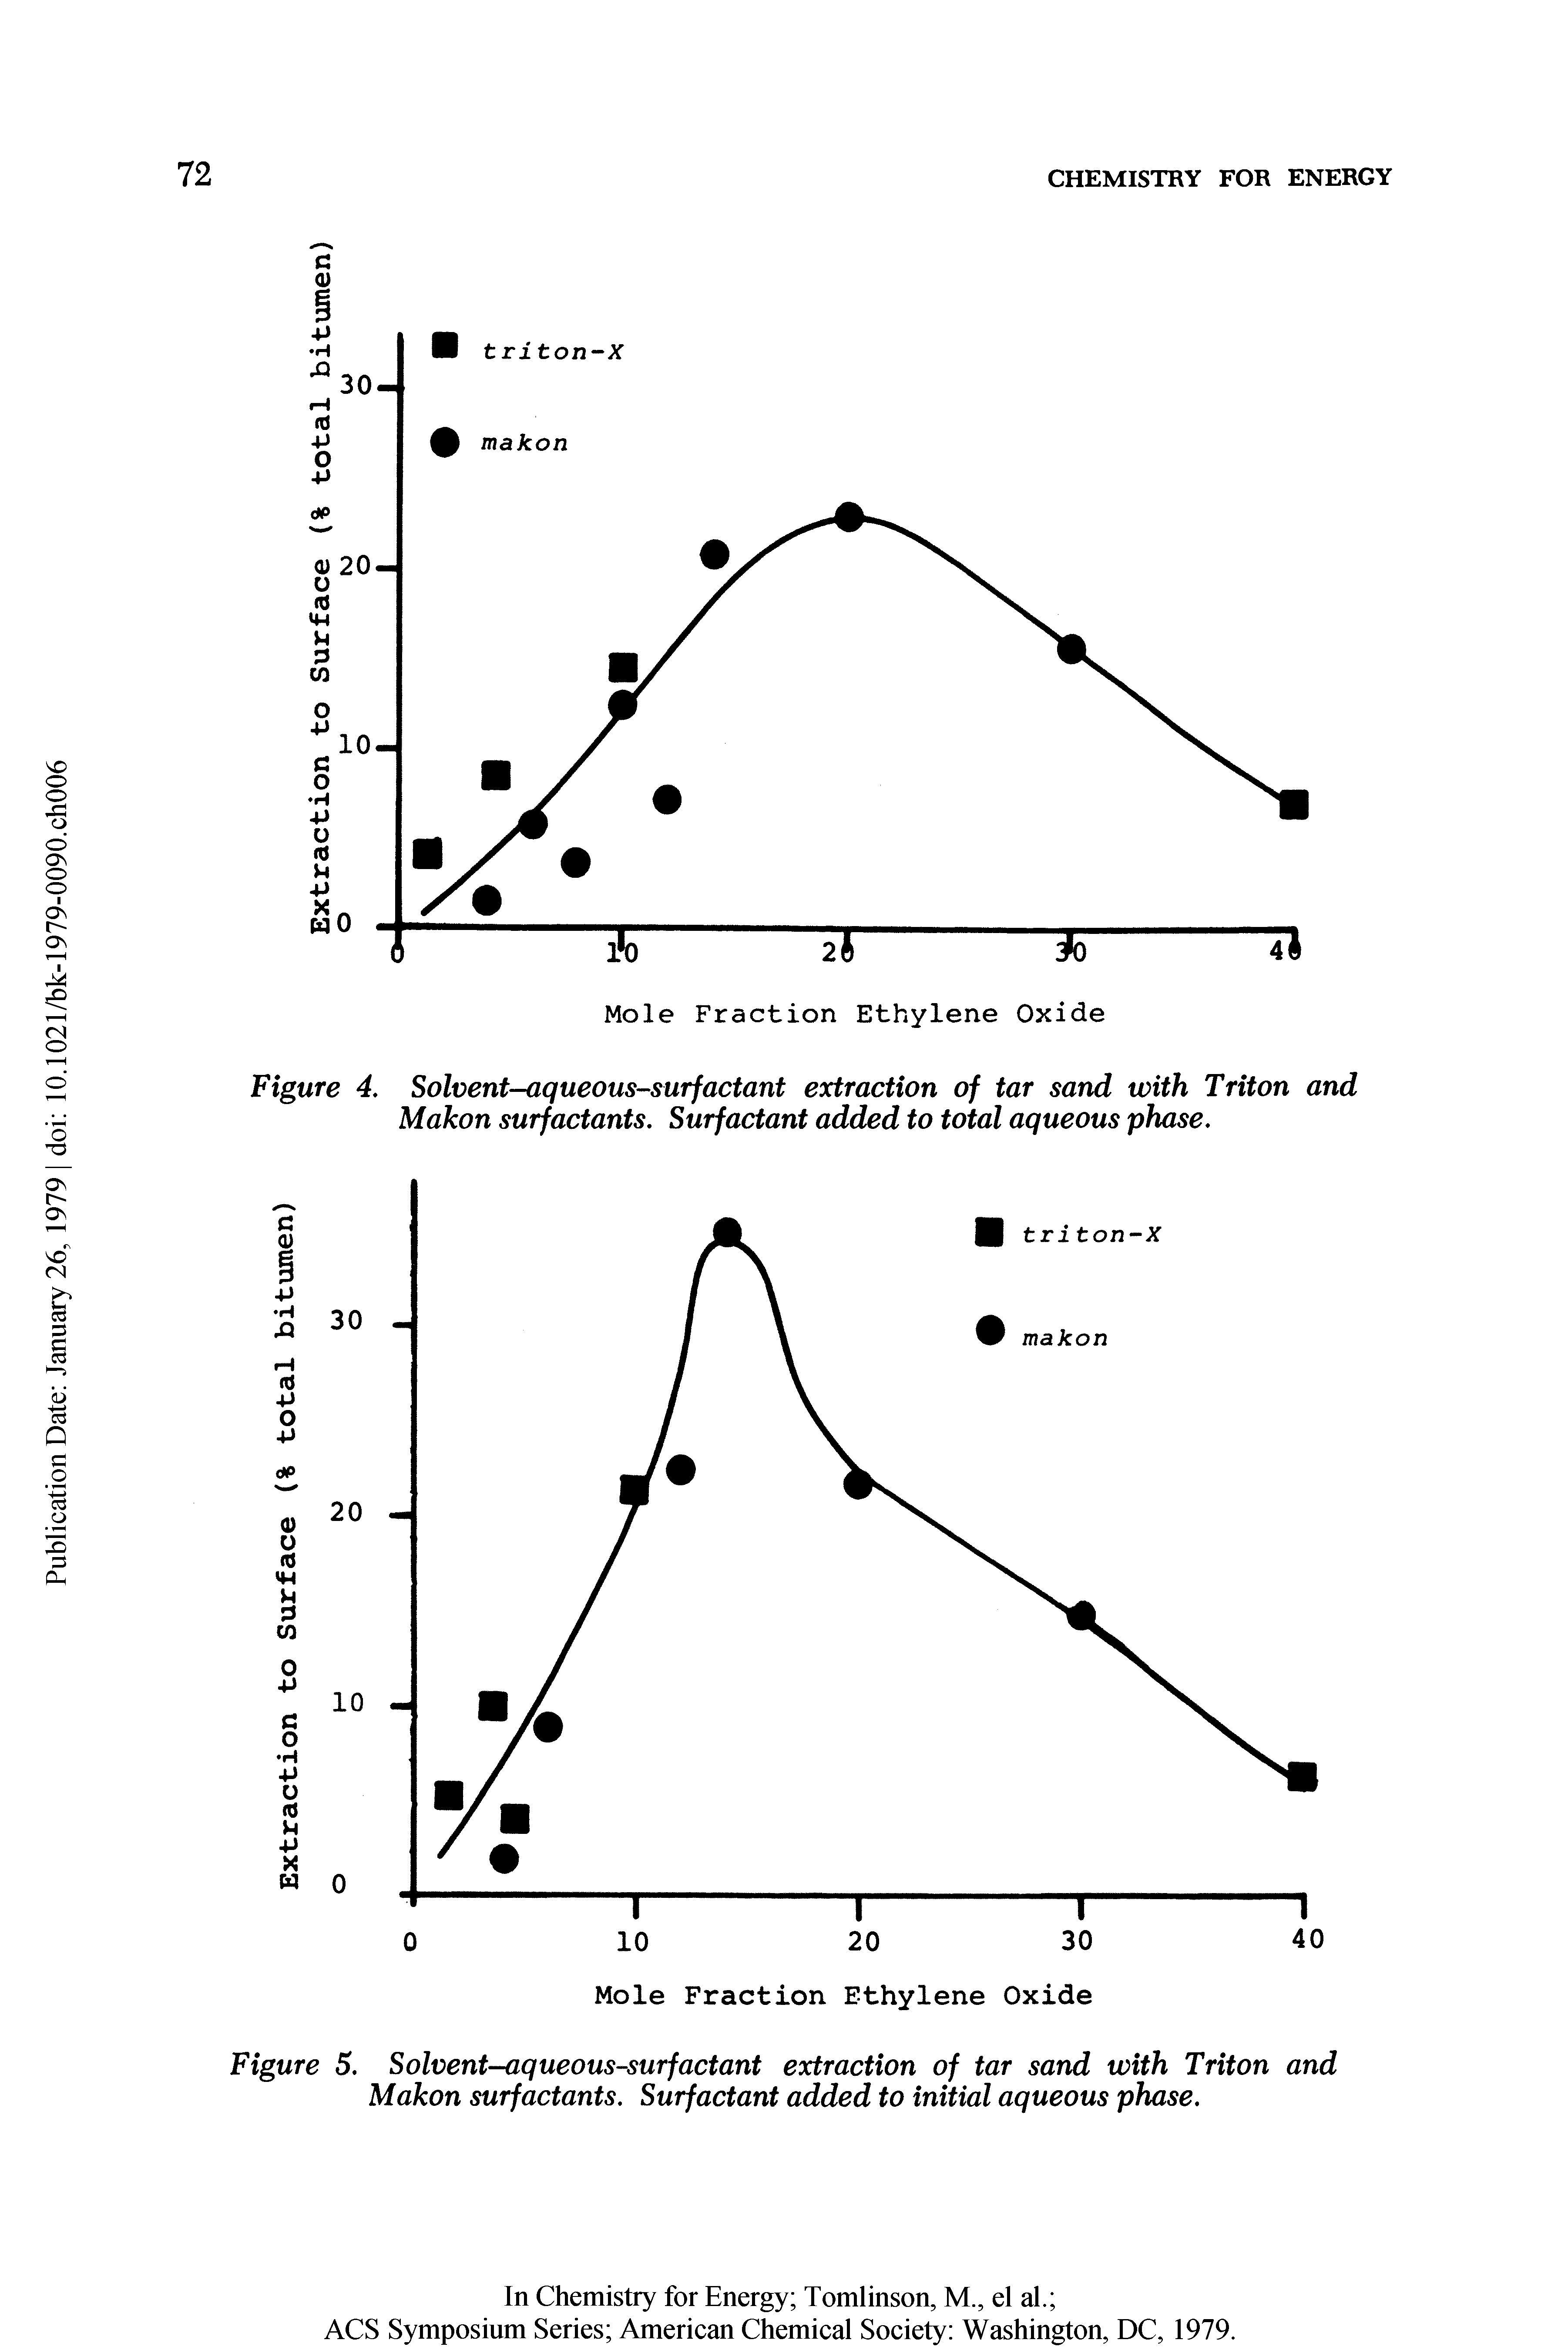 Figure 5. Solvent-aqueoussurfactant extraction of tar sand with Triton and Makon surfactants. Surfactant added to initial aqueous phase.